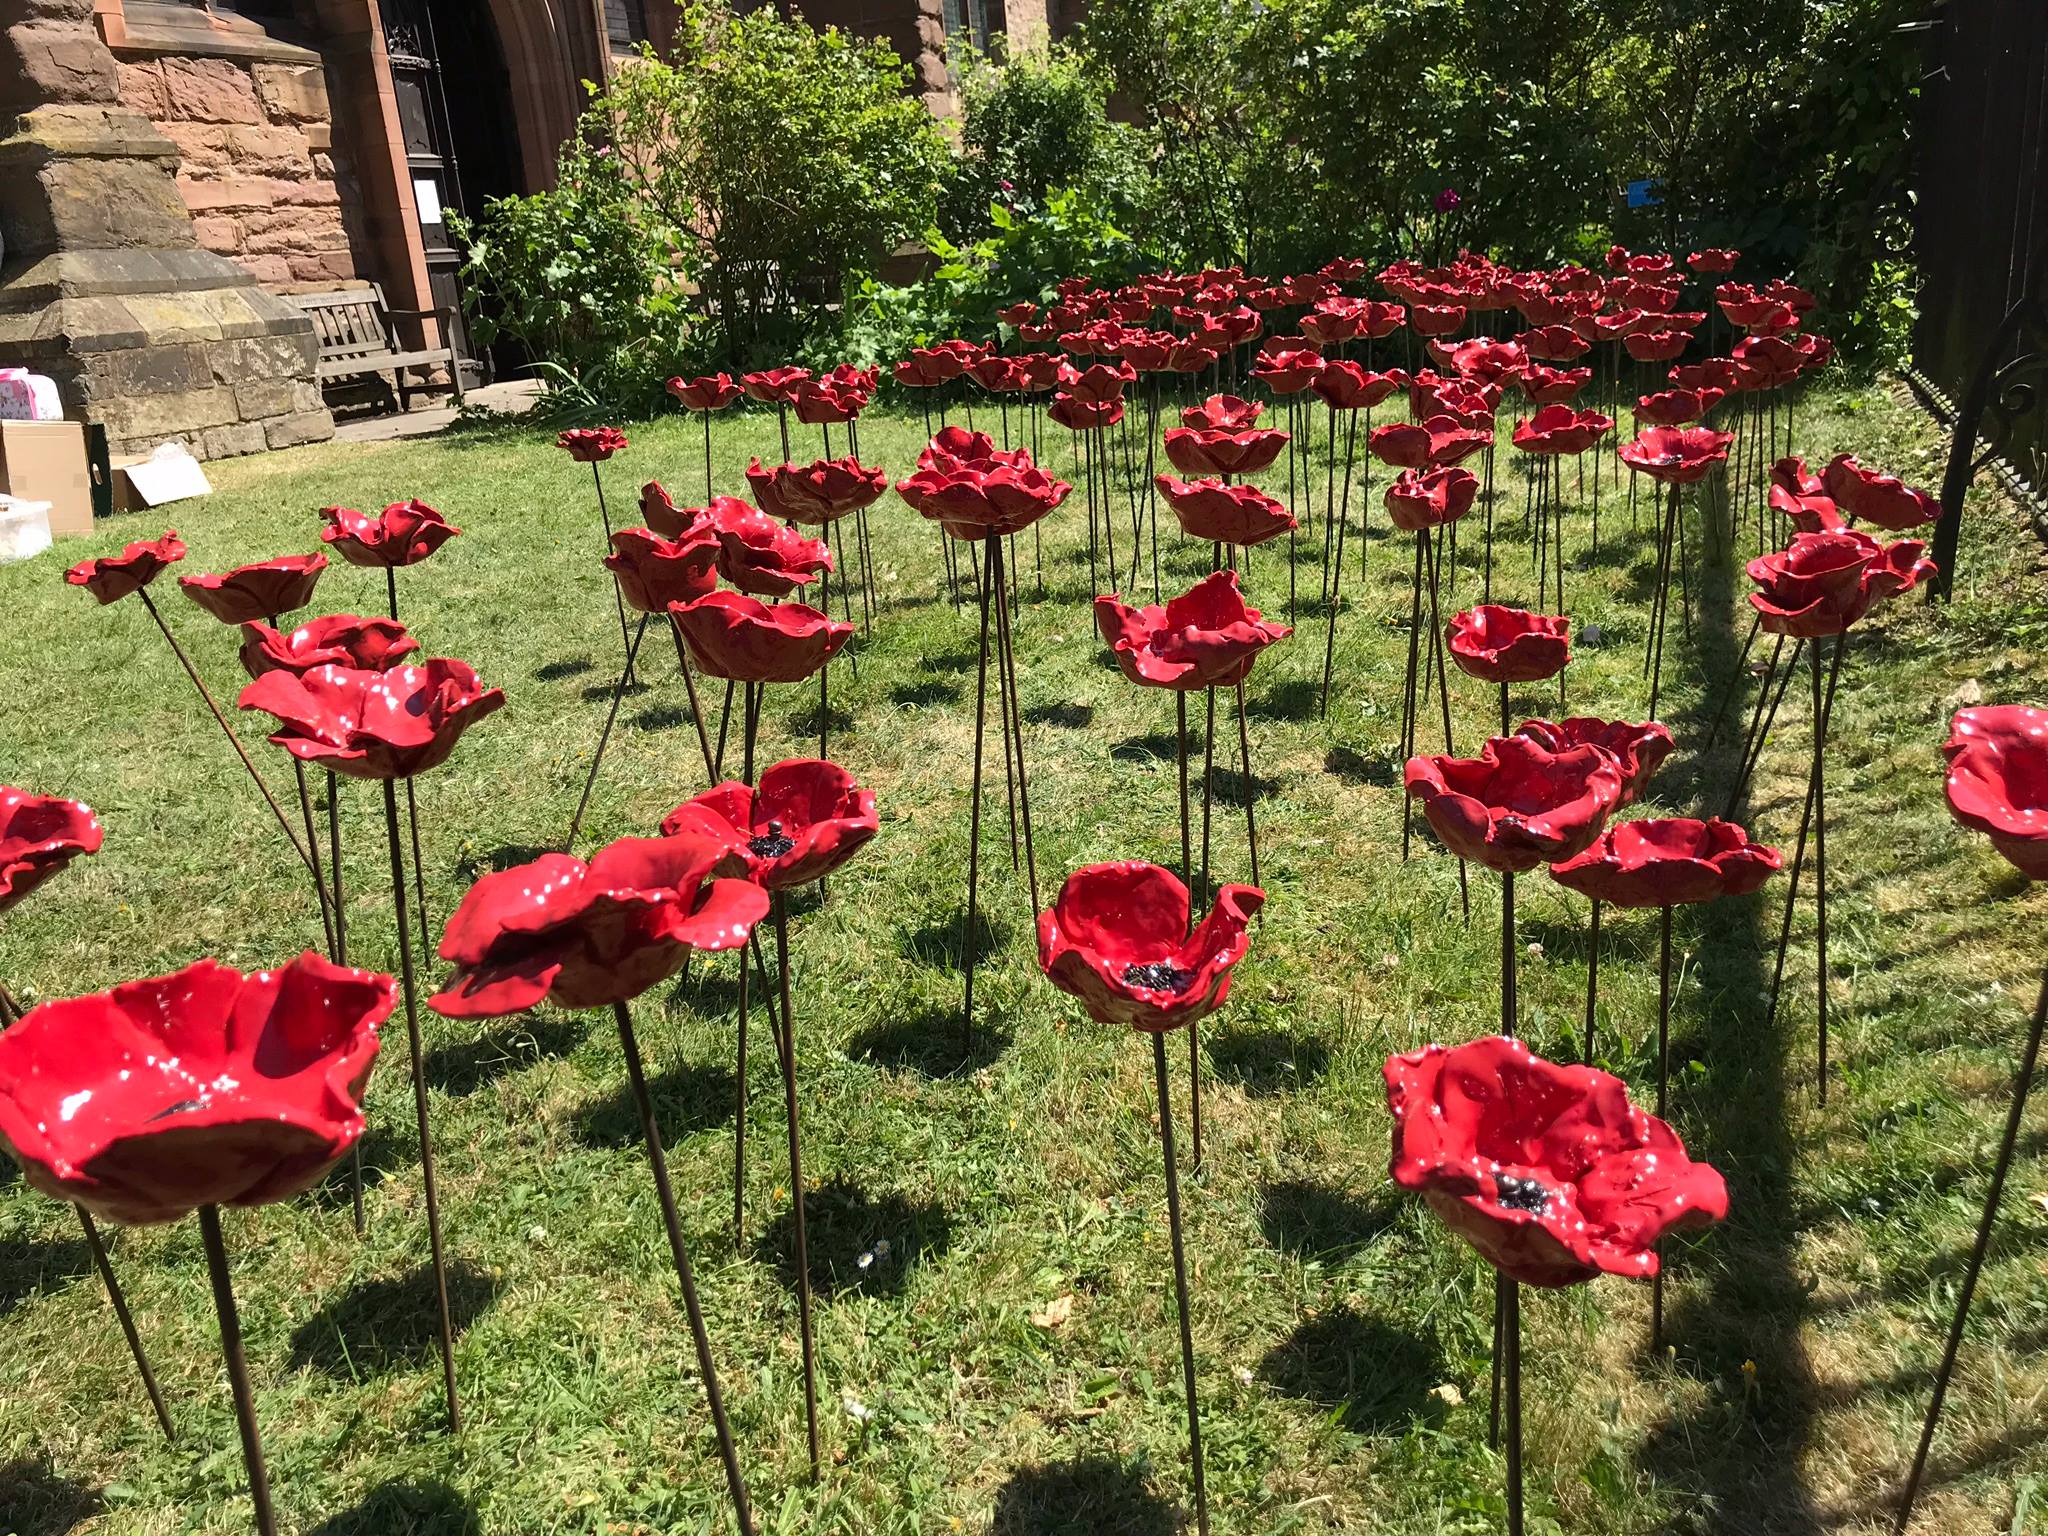 The beautiful garden of poppies at St Laurence's Church, Ludlow